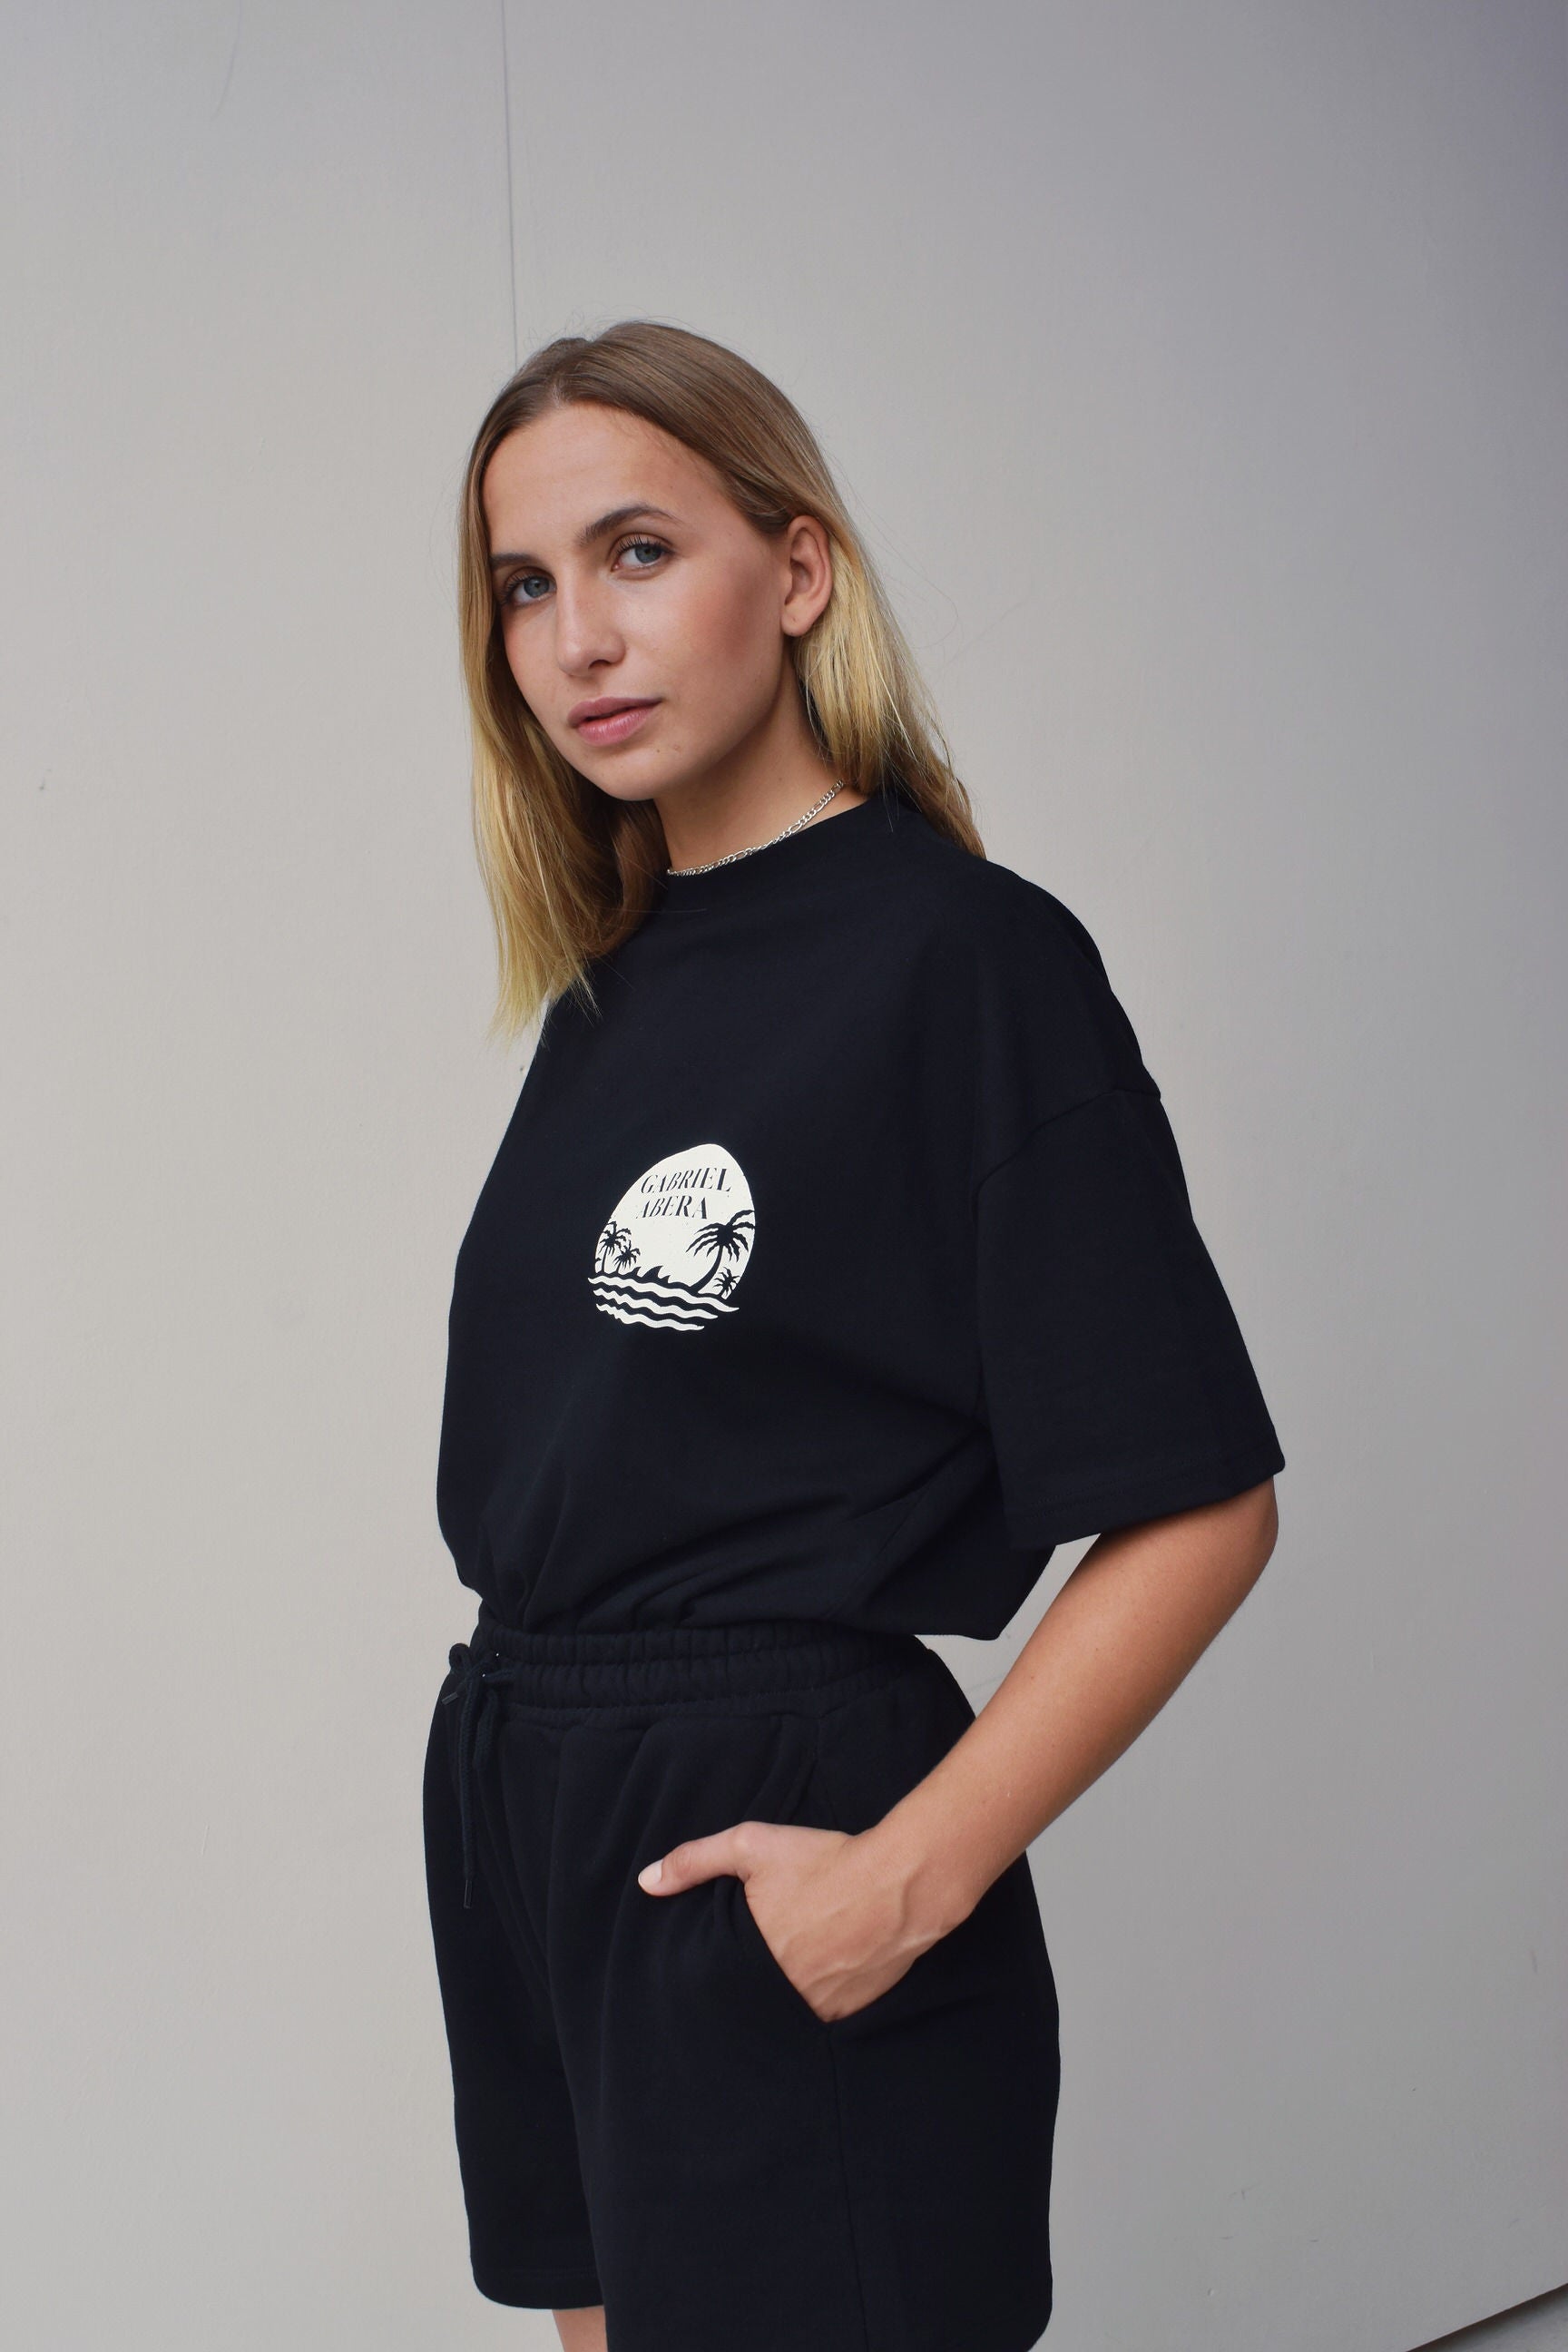 Female model wearing a Black oversize Tshirt with round brand design